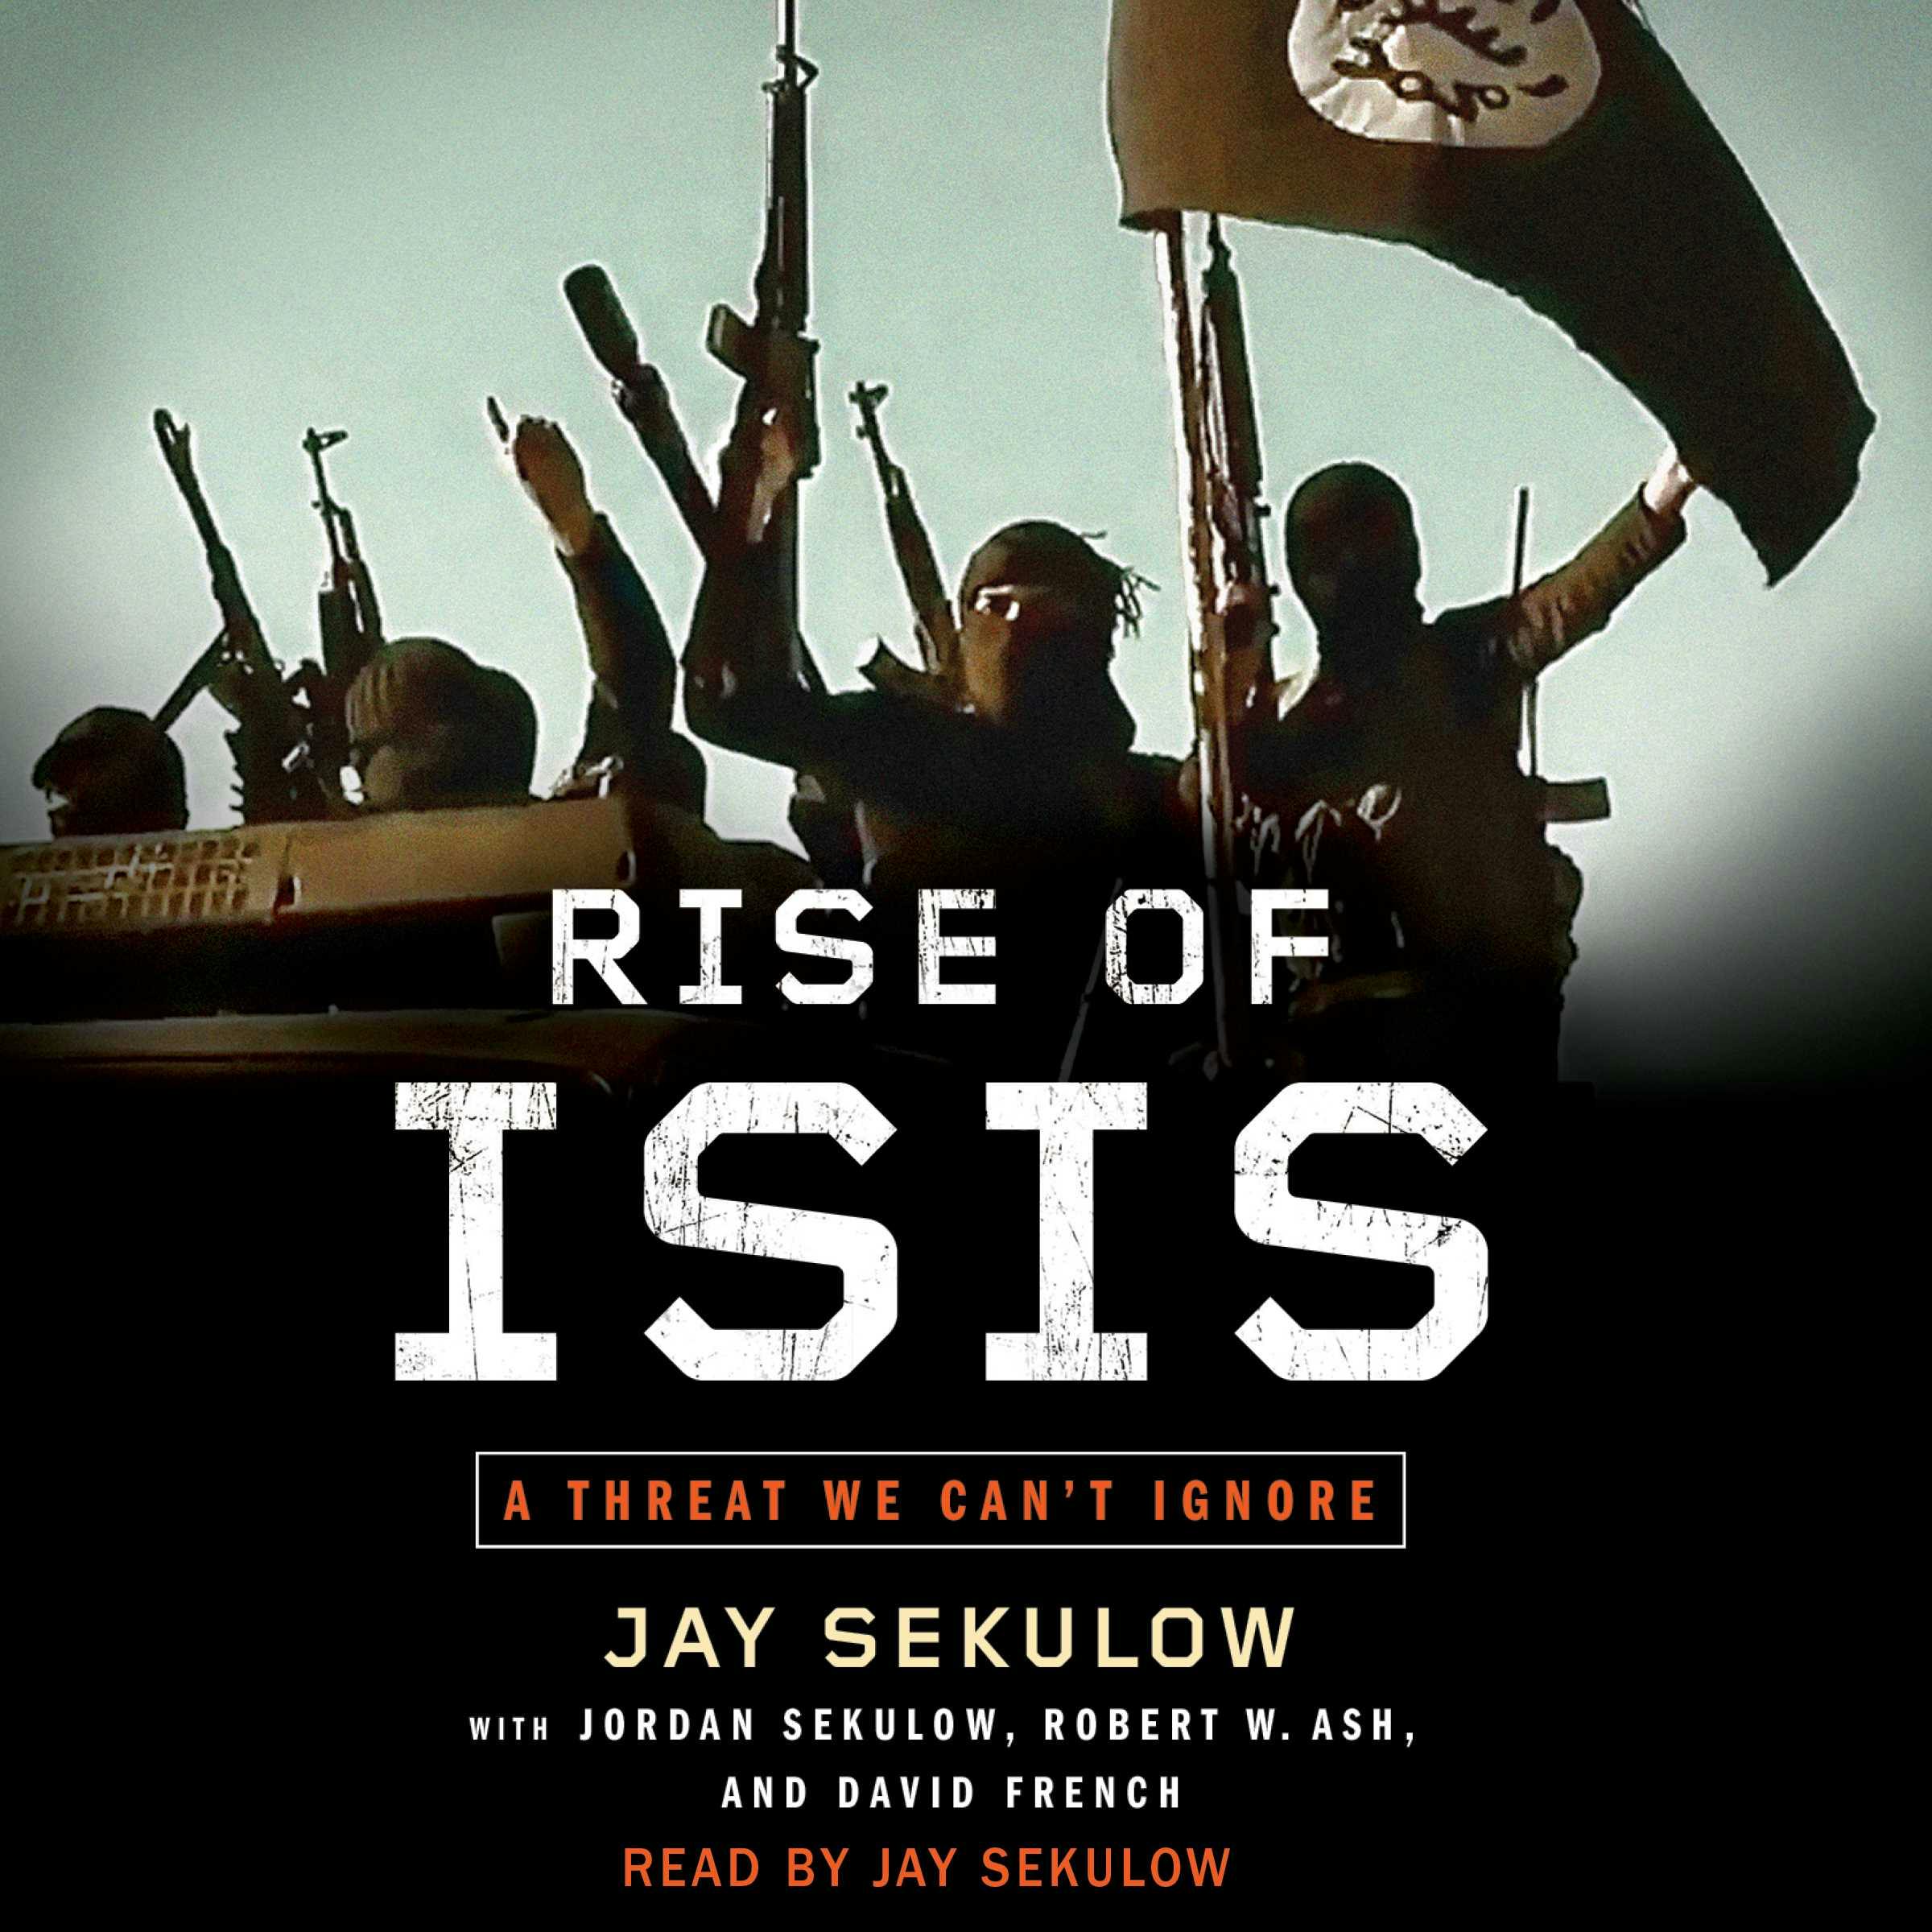 Rise of ISIS: A Threat We Can't Ignore - Jay Sekulow